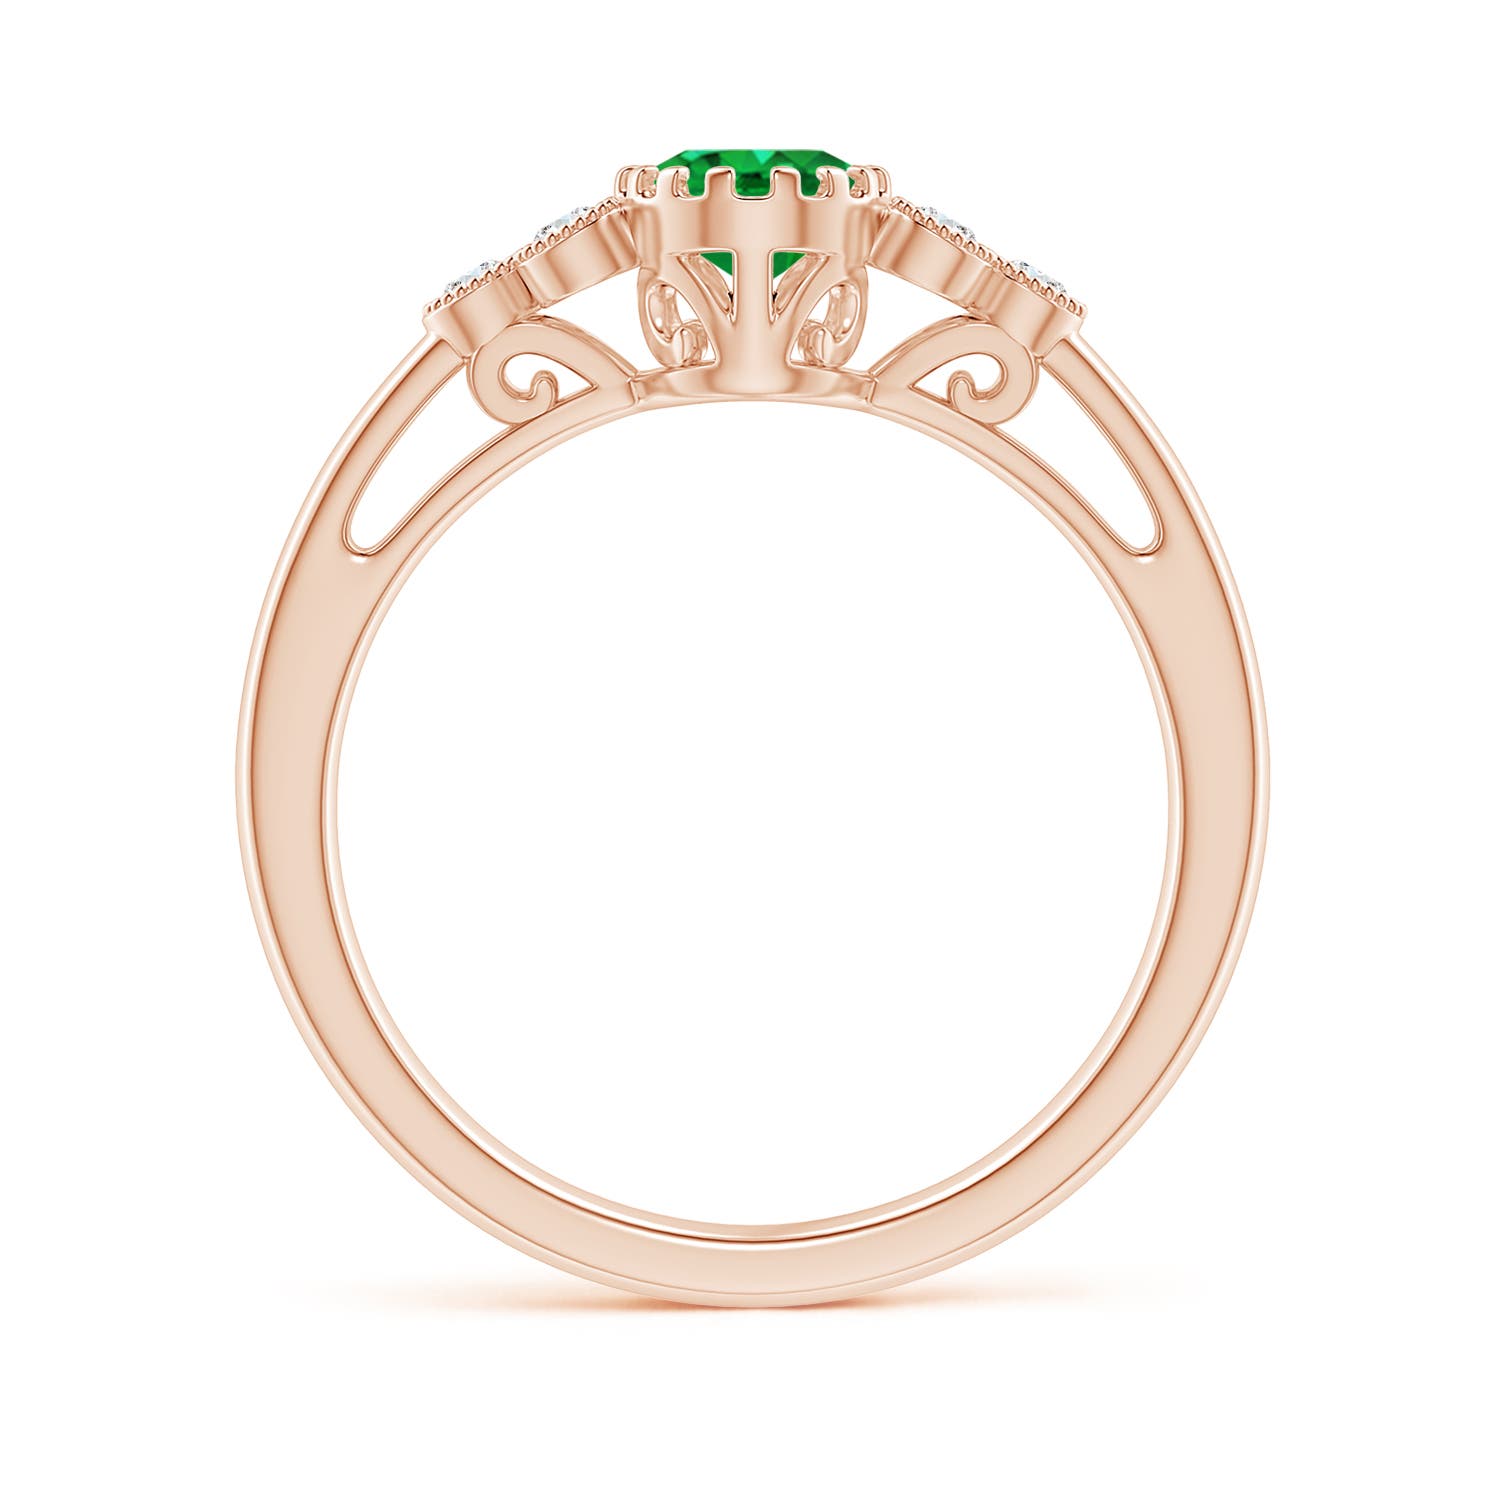 AAA - Emerald / 0.8 CT / 14 KT Rose Gold